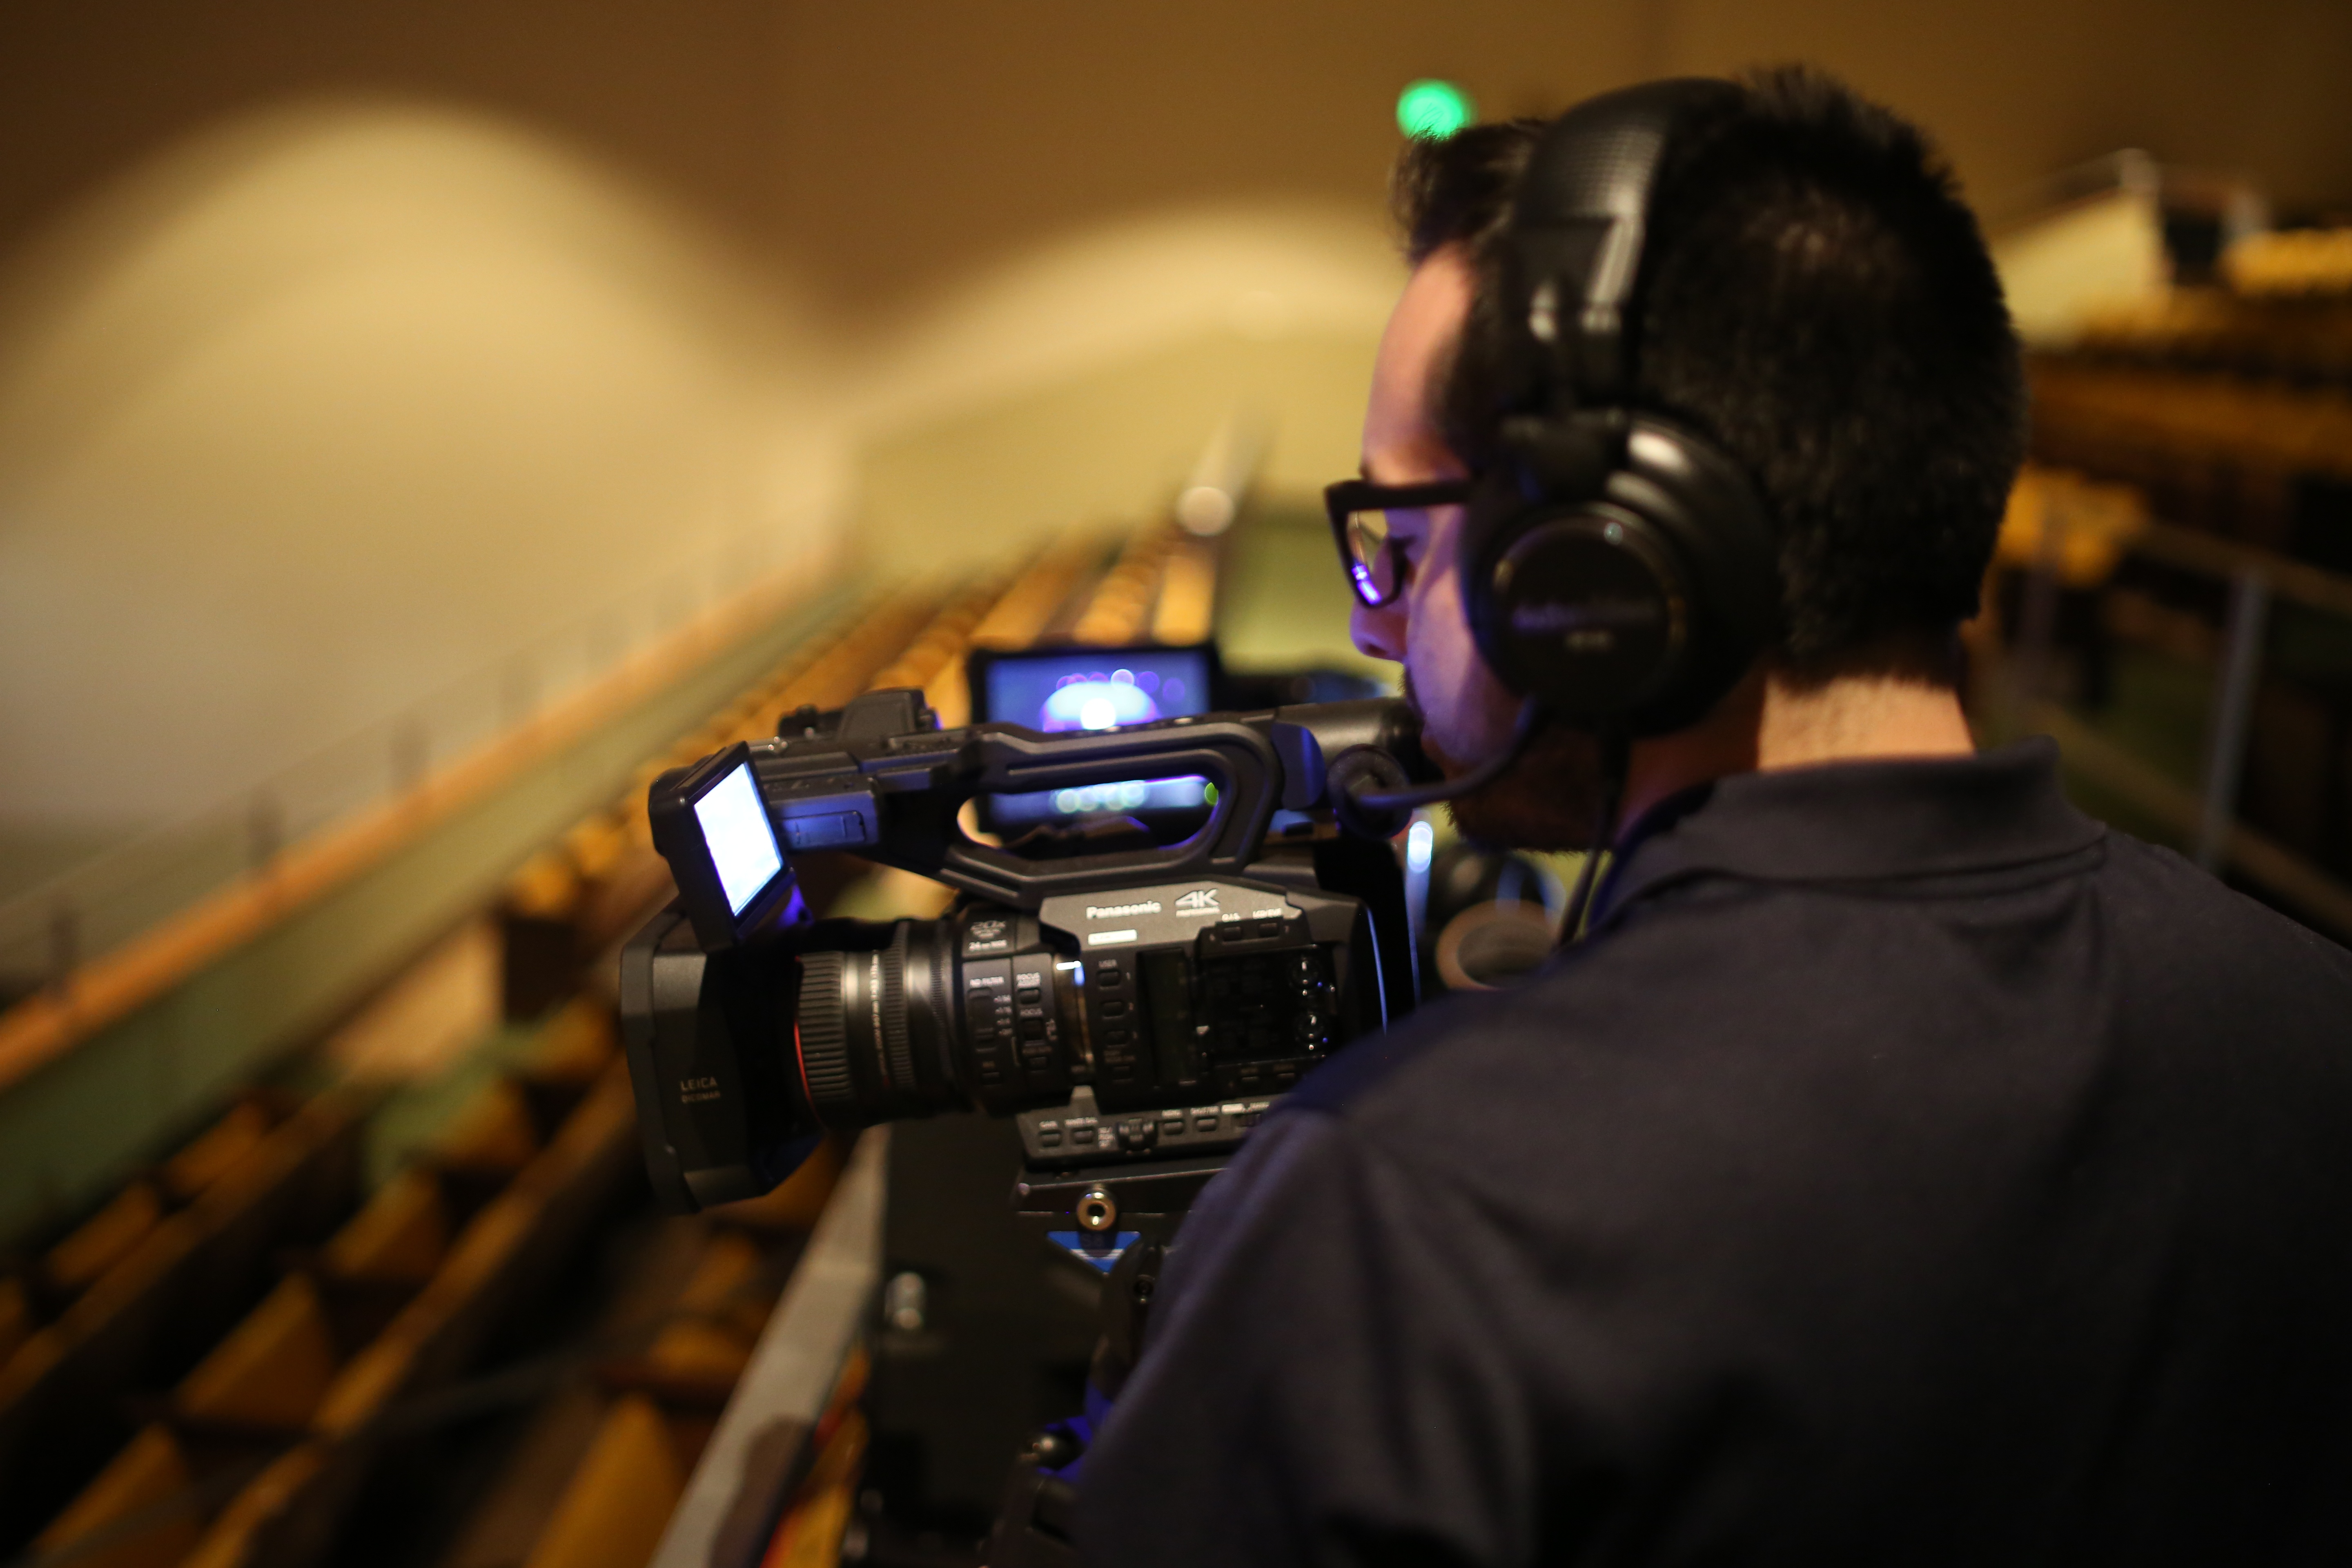 Man with headphones on shoots with a video camera